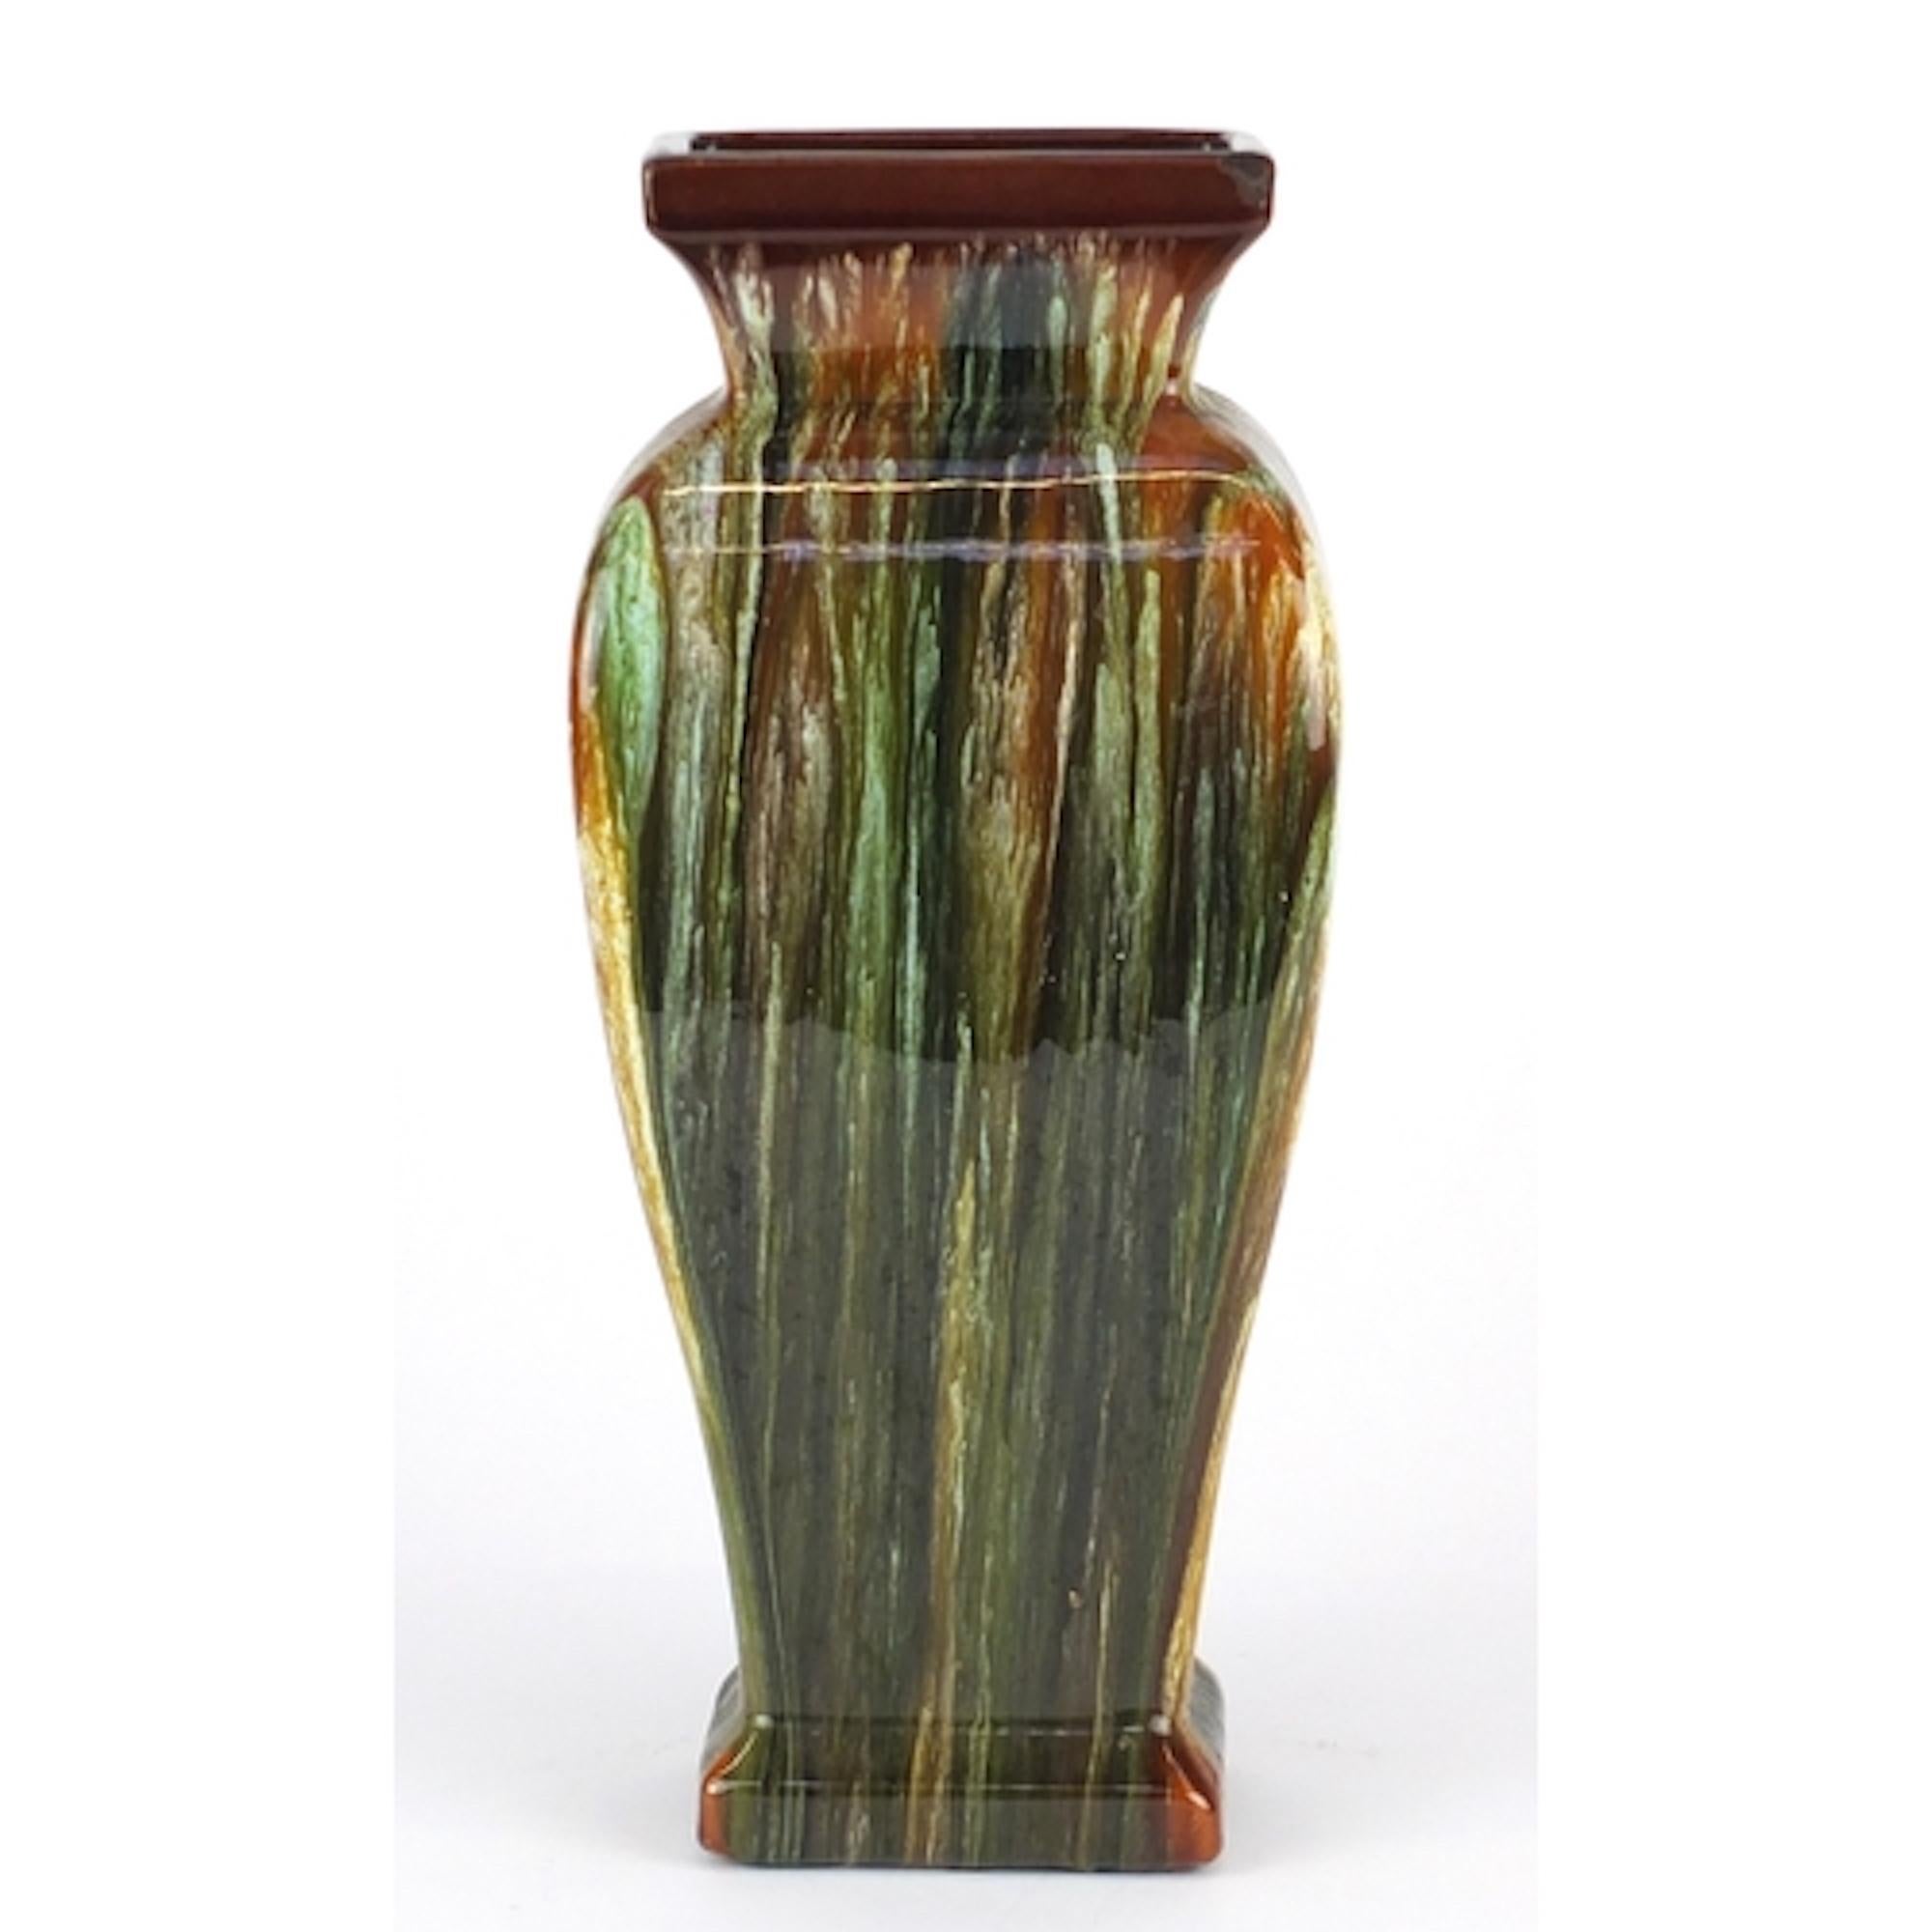 Art Nouveau Bretby vase is an original decorative object realized in the 20th century by Bretby Art Pottery. 

Original ceramic vase with a dripping glaze, in the style of Christopher dresser, impressed marks and numbered 2167H. 

This beautiful